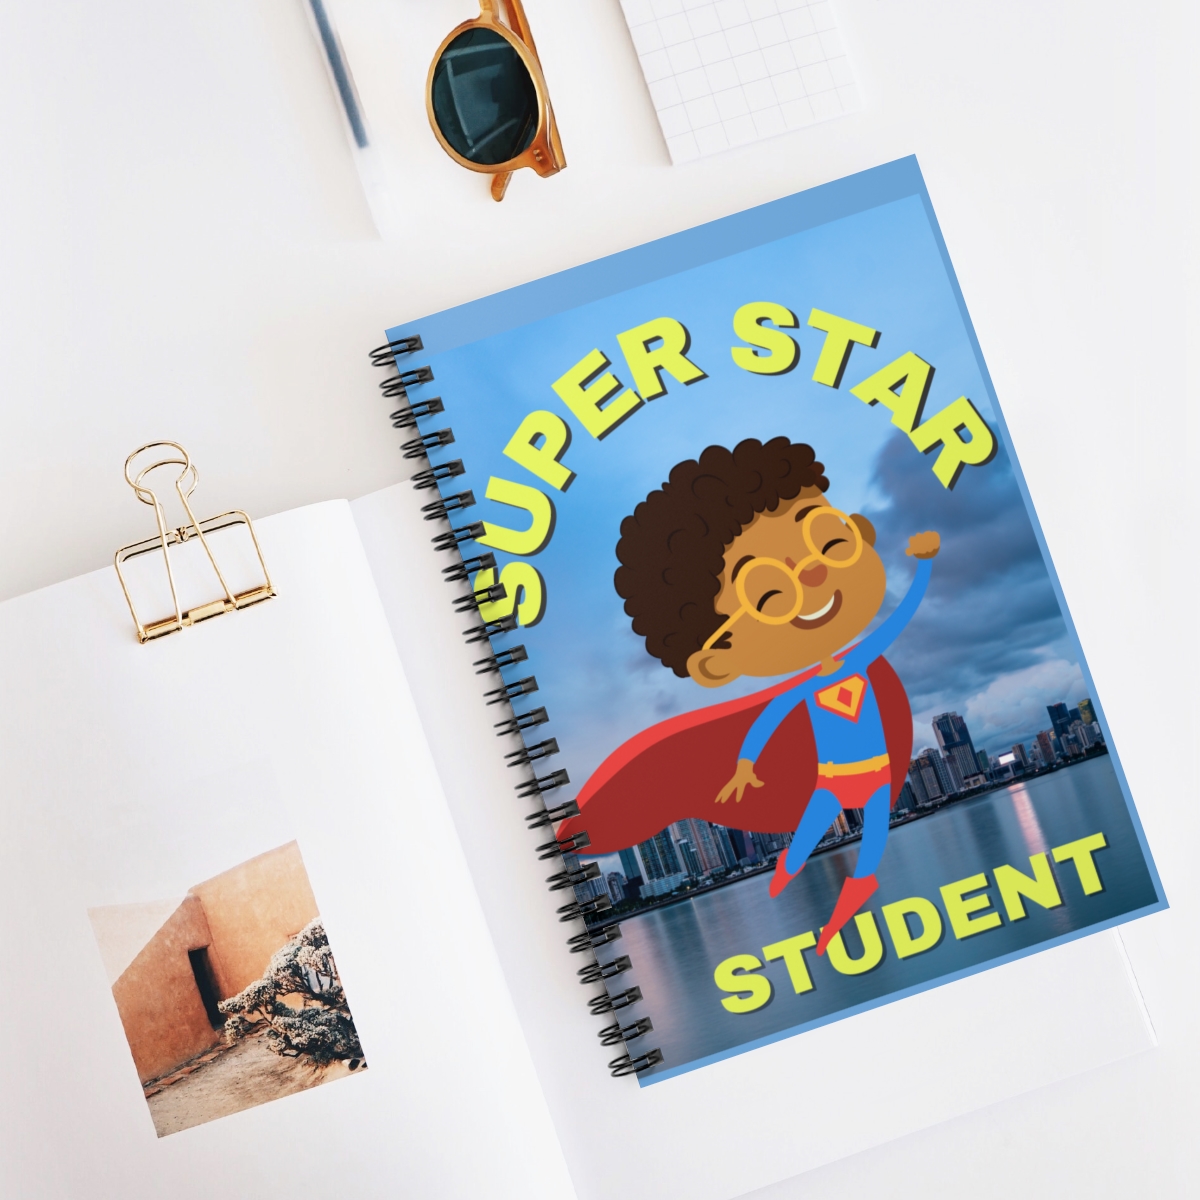 Super Star Student Spiral Notebook (Girls) product thumbnail image